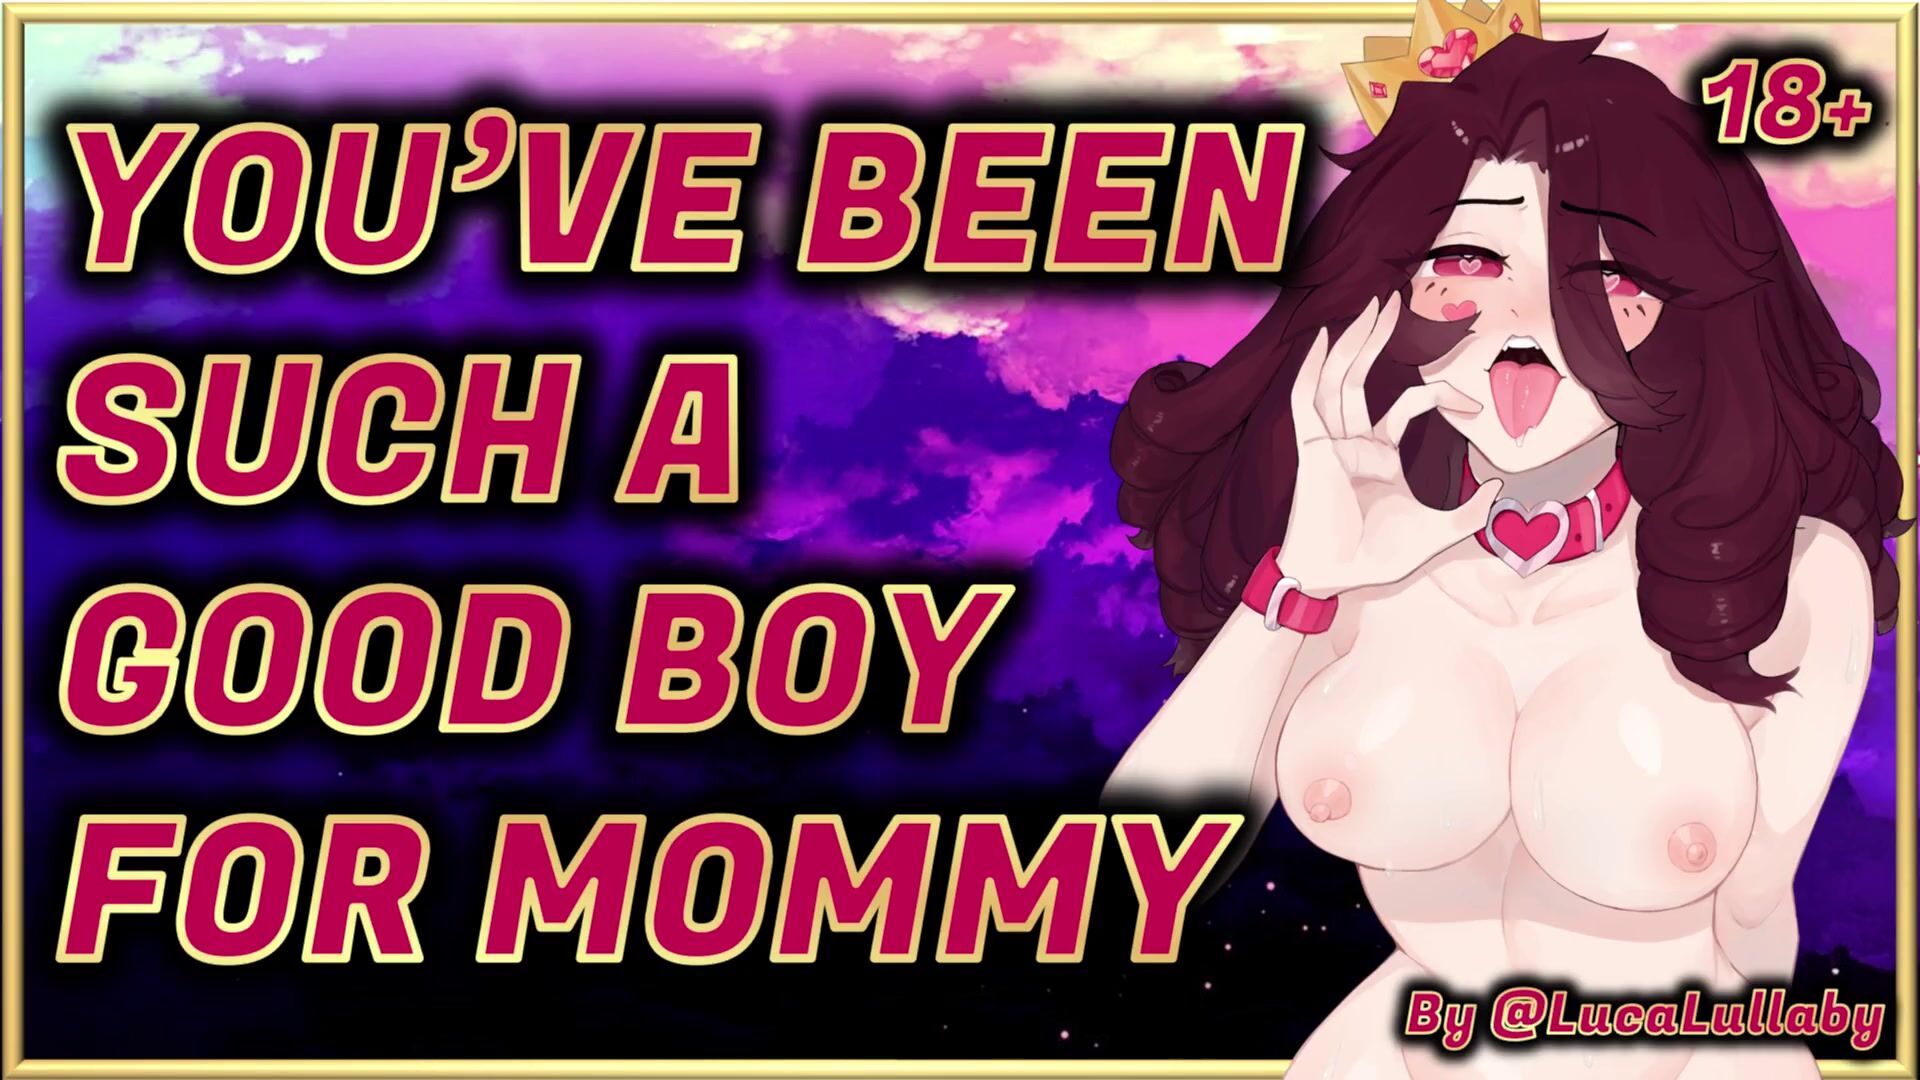 ASMR You've been a Great Boy for Mom